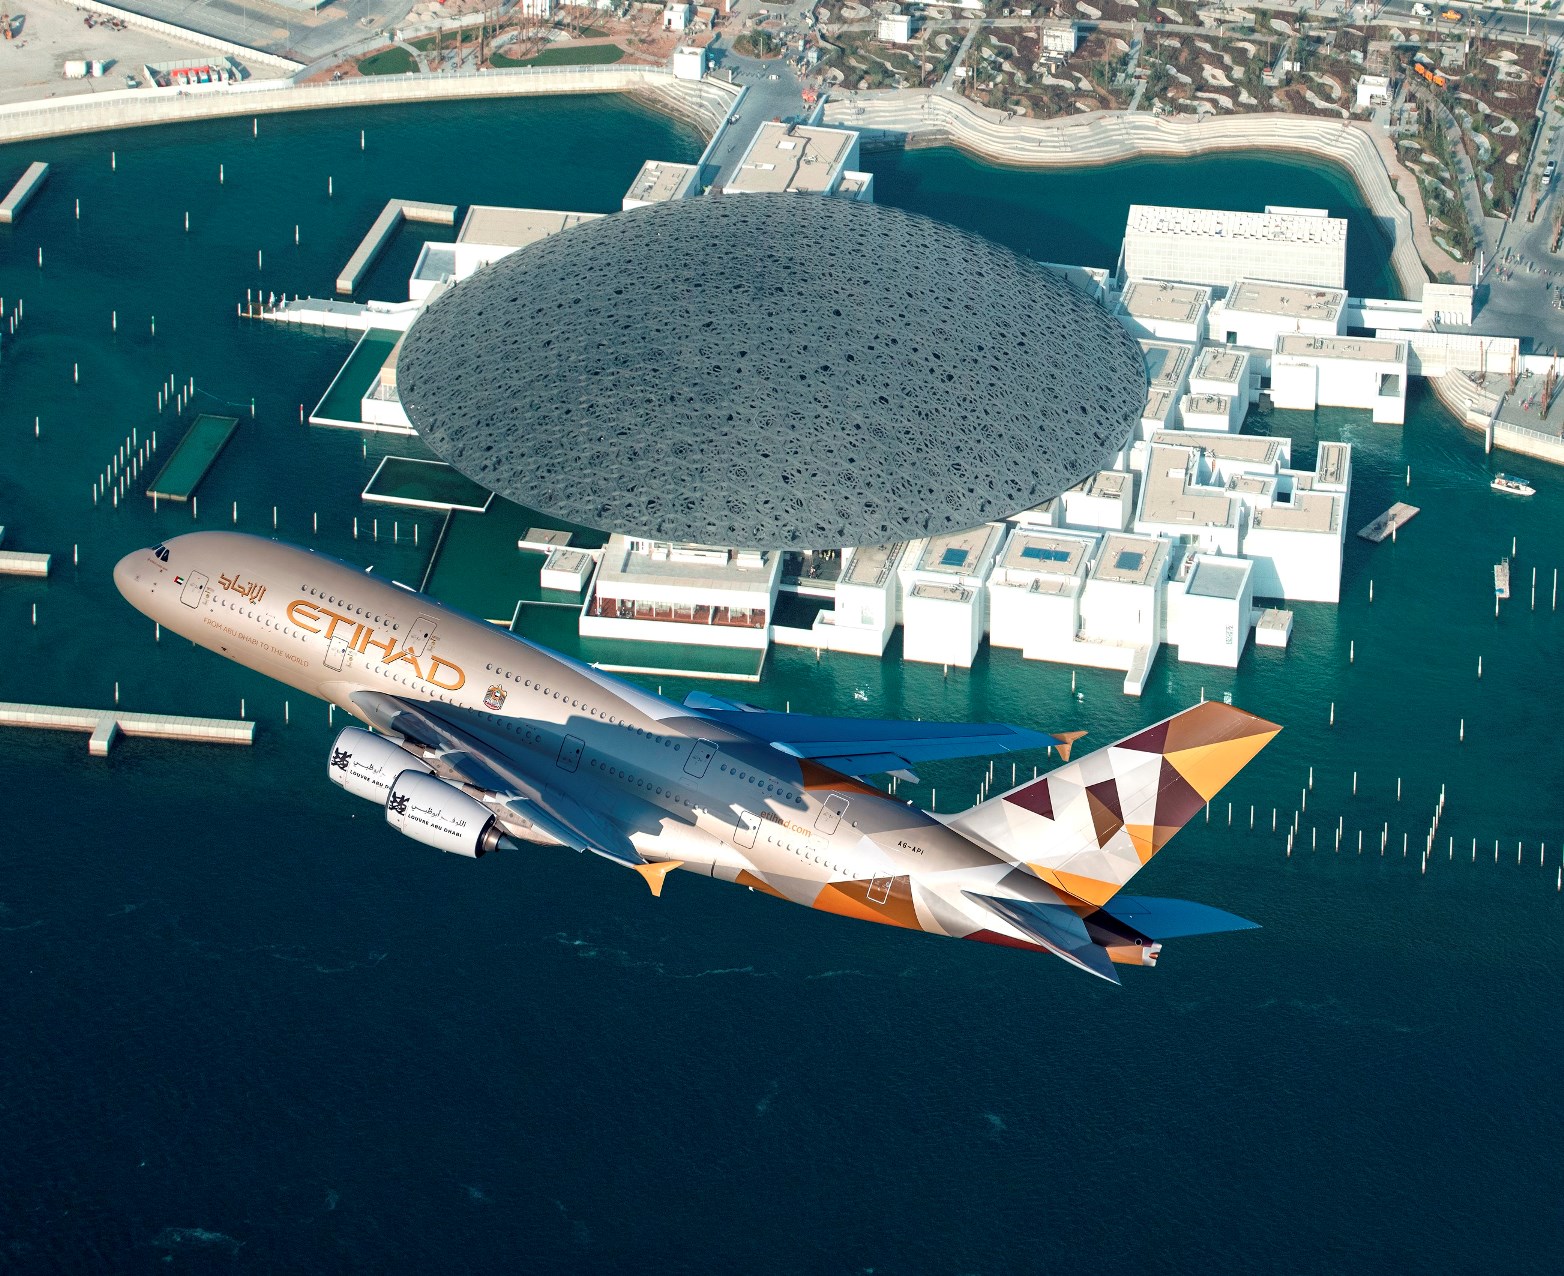 Etihad Airways to Introduce Airbus A380 on Daily Seoul Service